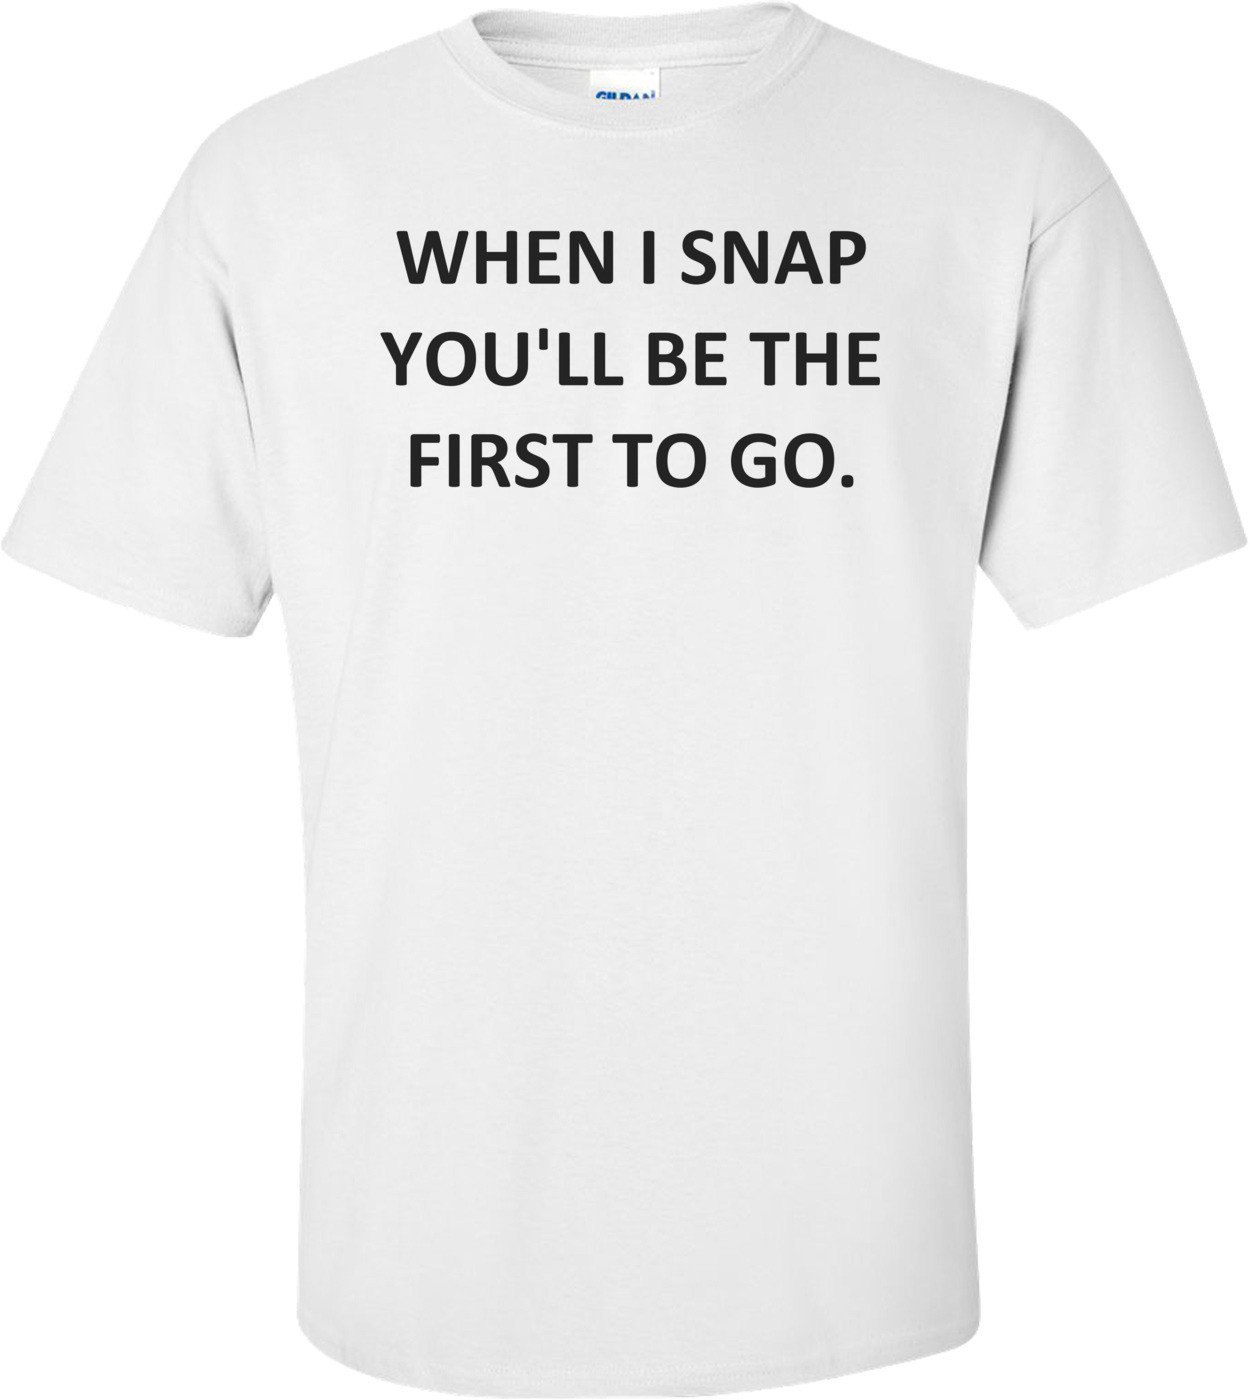 WHEN I SNAP YOU'LL BE THE FIRST TO GO. Shirt